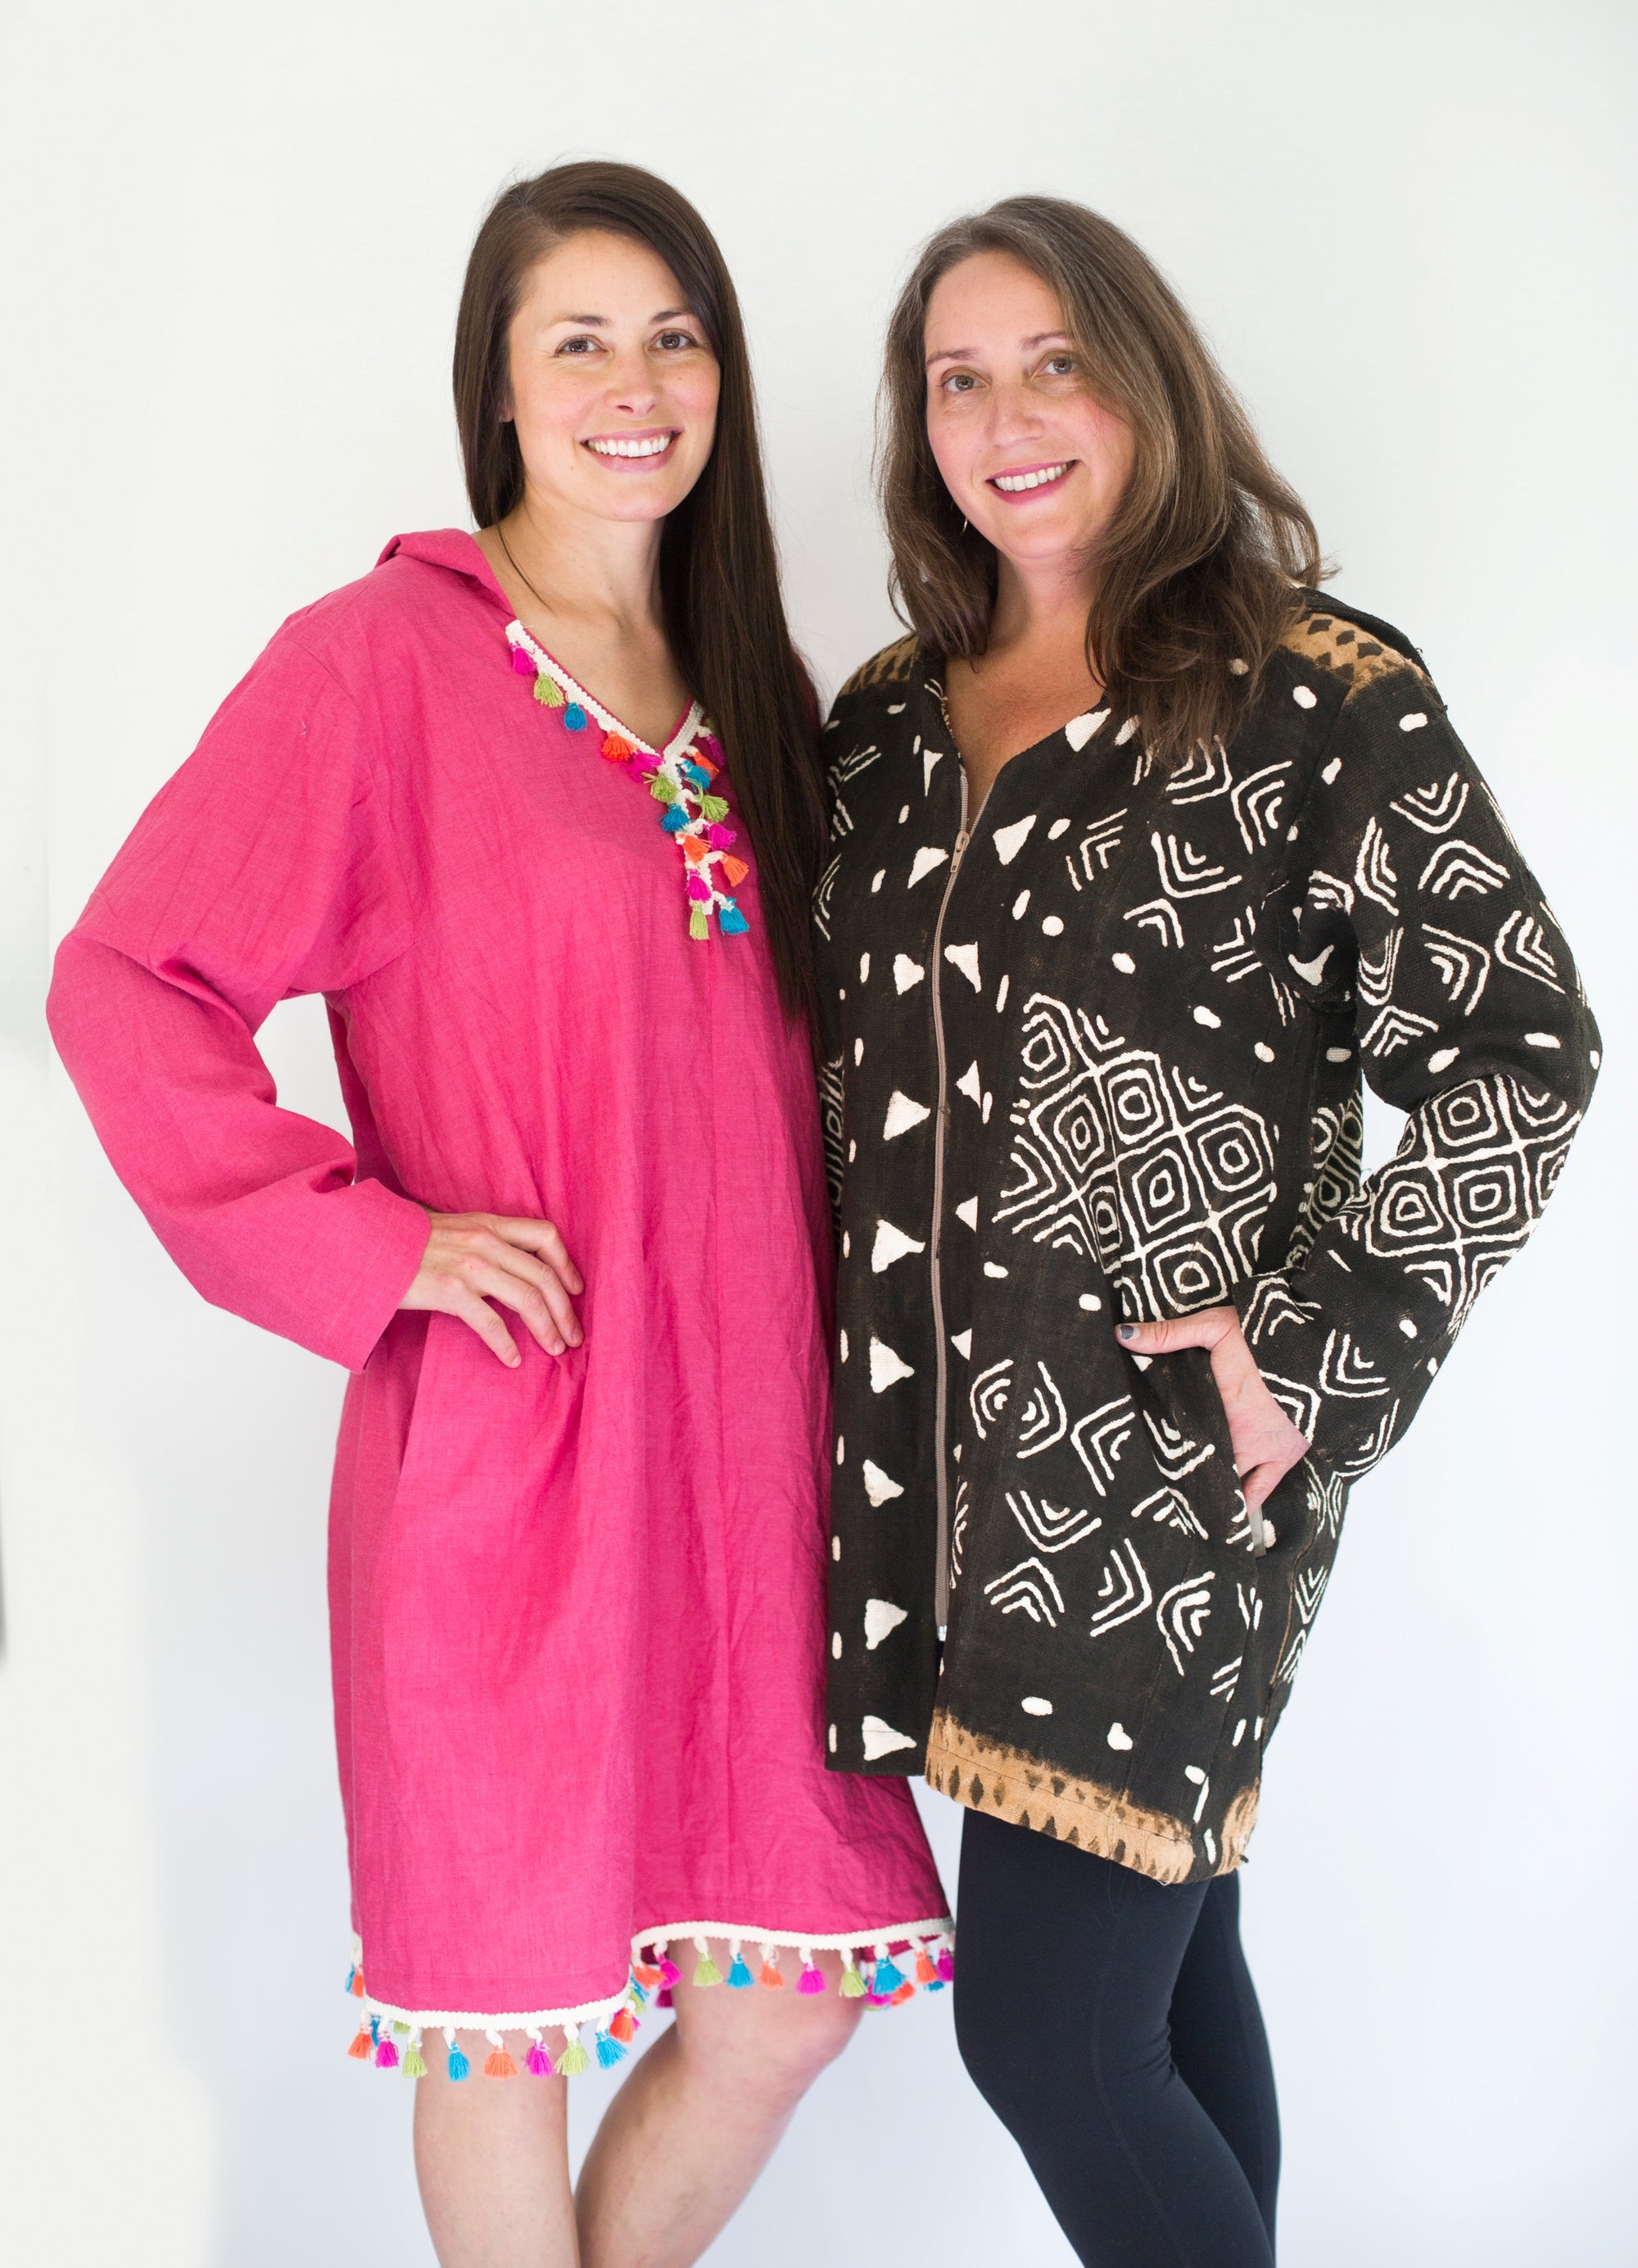 Two Brunette white women standing together smiling with hands on their hips standing in front of a white studio backdrop, wearing the Moroccan Djellaba woman on the left is wearing the pullover while woman on the right is wearing one made with a front zipper. 